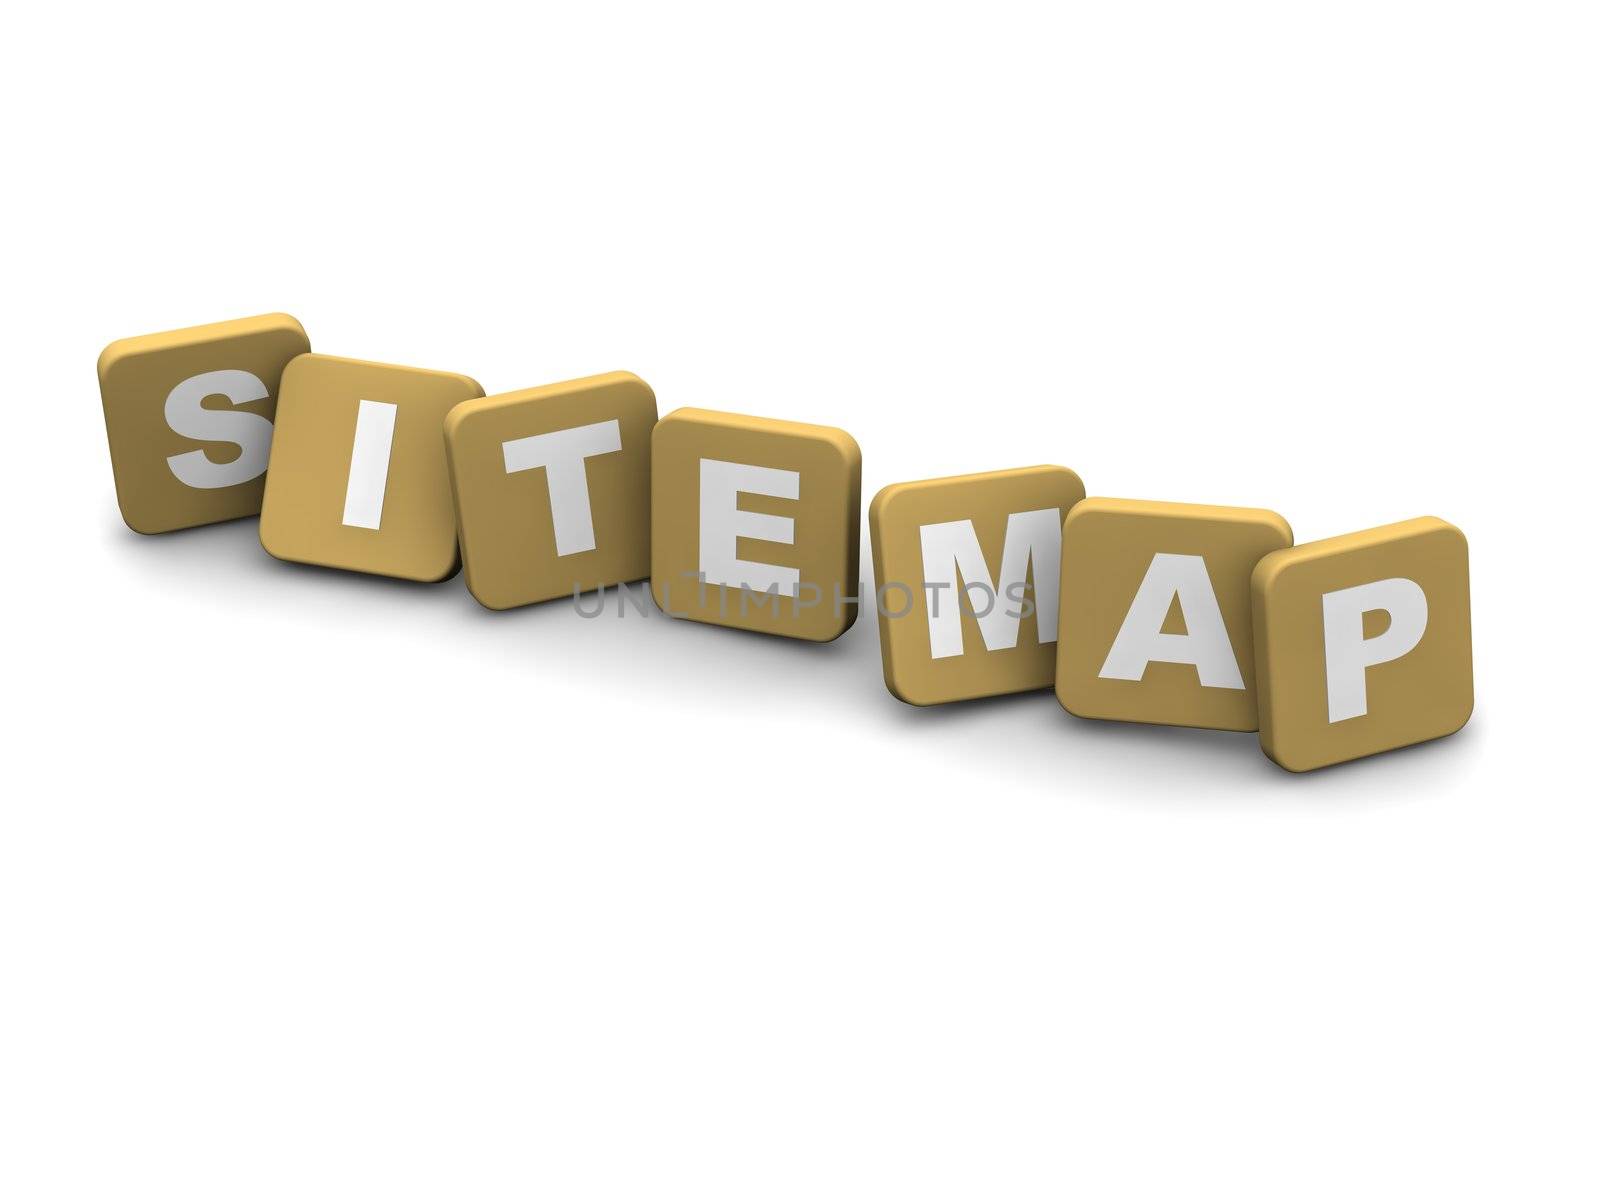 Site Map text. 3d rendered illustration isolated on white.